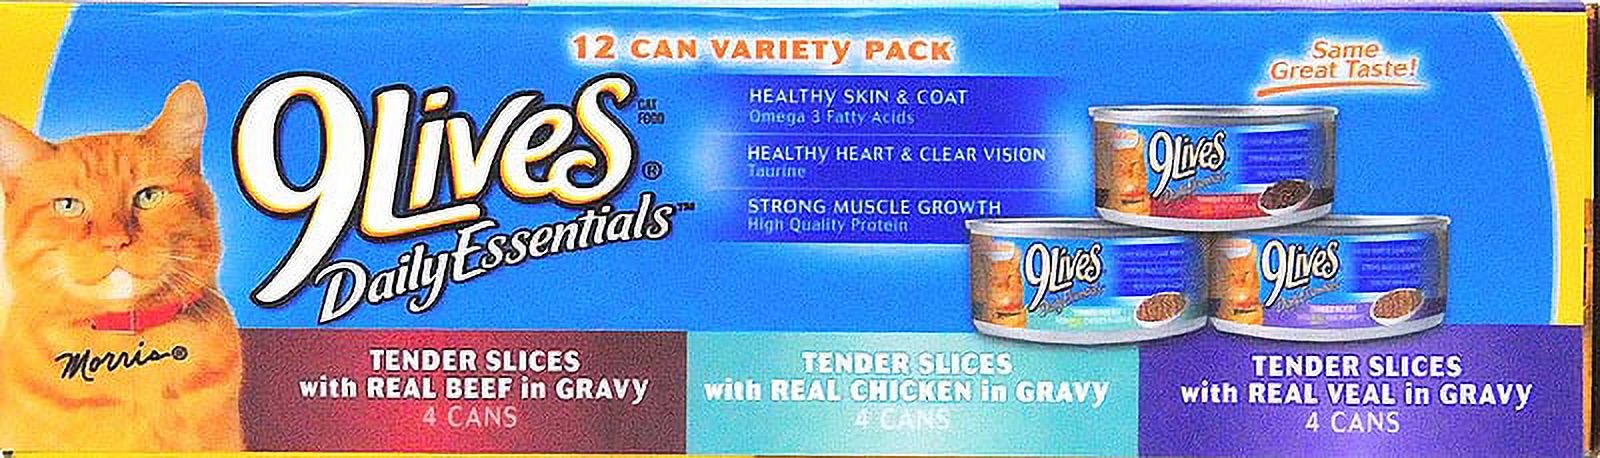 (12 Pack) 9Lives Gravy Favorites Variety Pack Canned Wet Cat Food, 5.5 oz. Cans - image 5 of 5